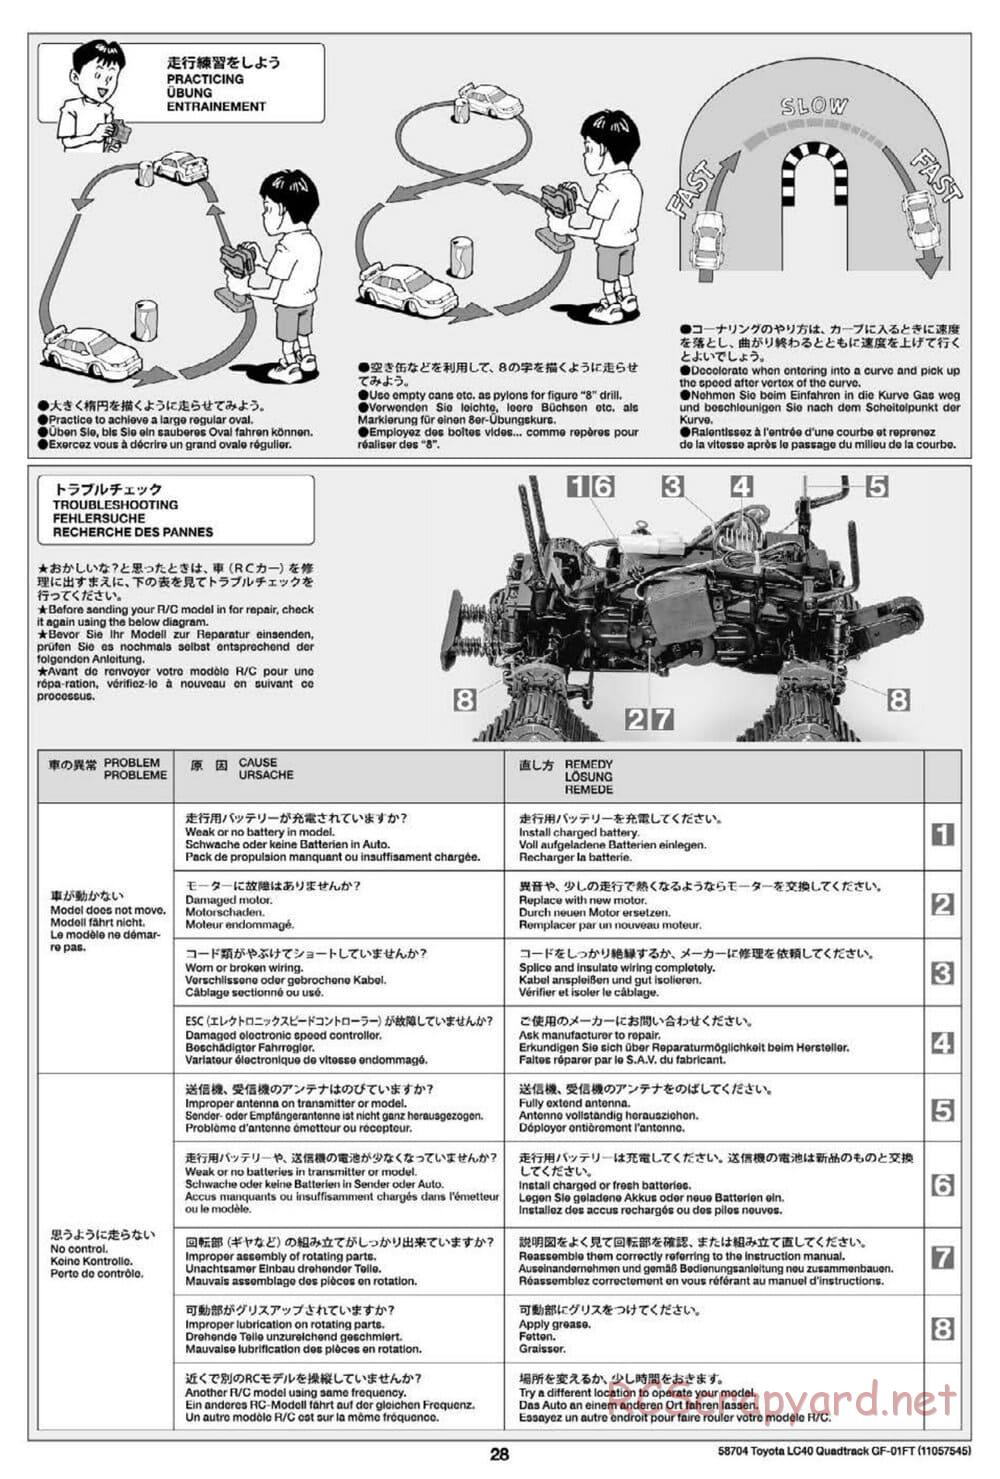 Tamiya - Toyota Land Cruiser 40 Pick-Up Quadtrack - GF-01FT Chassis - Manual - Page 28